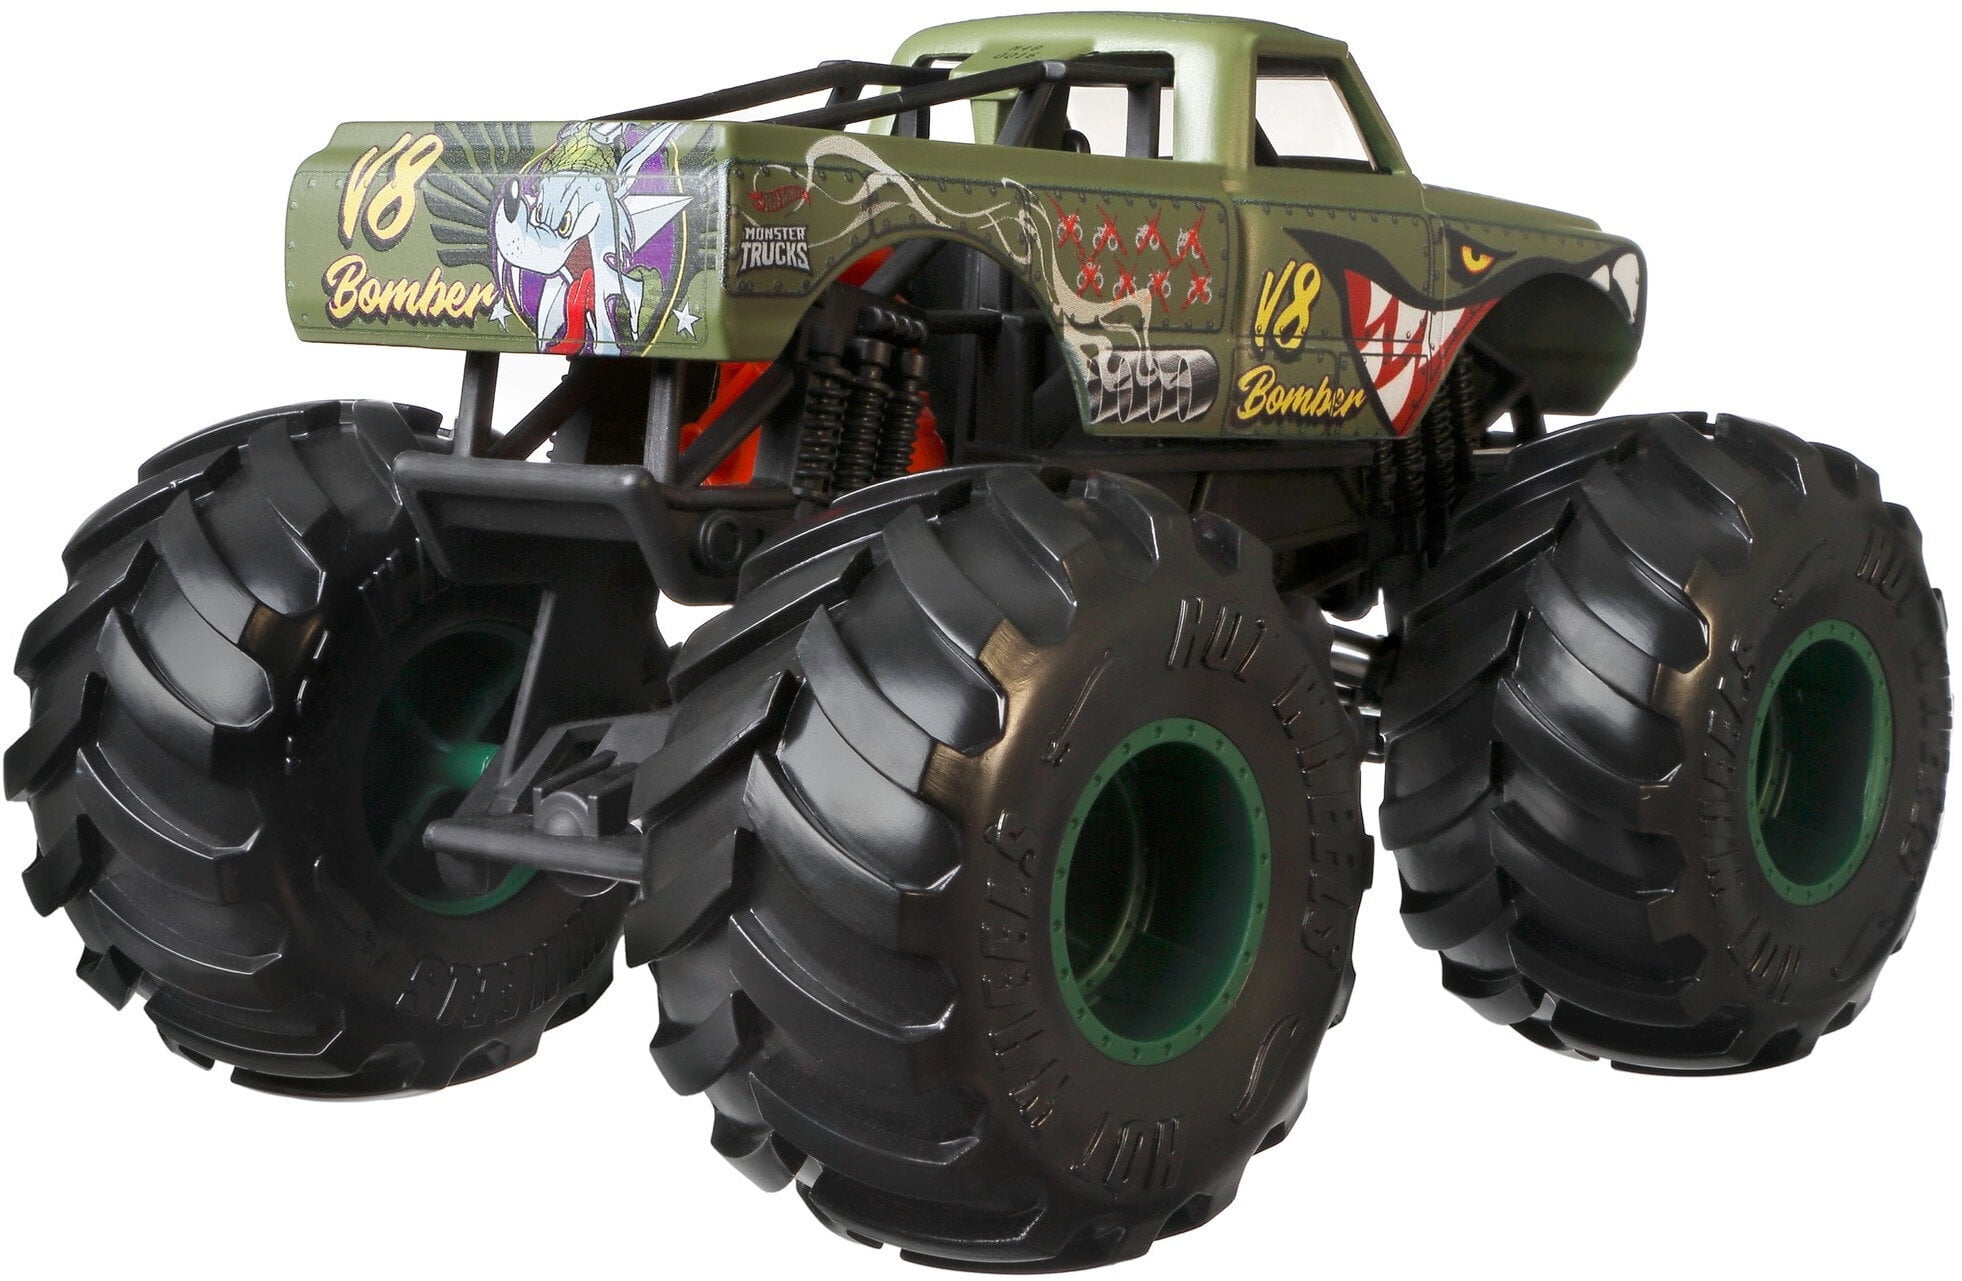 Hot Wheels Monster Trucks Bomber, 1:24 Scale for Kids Age 3, 4, 5, 6, 7, &  8 Years Old Great Gift Toy Trucks Large Scales